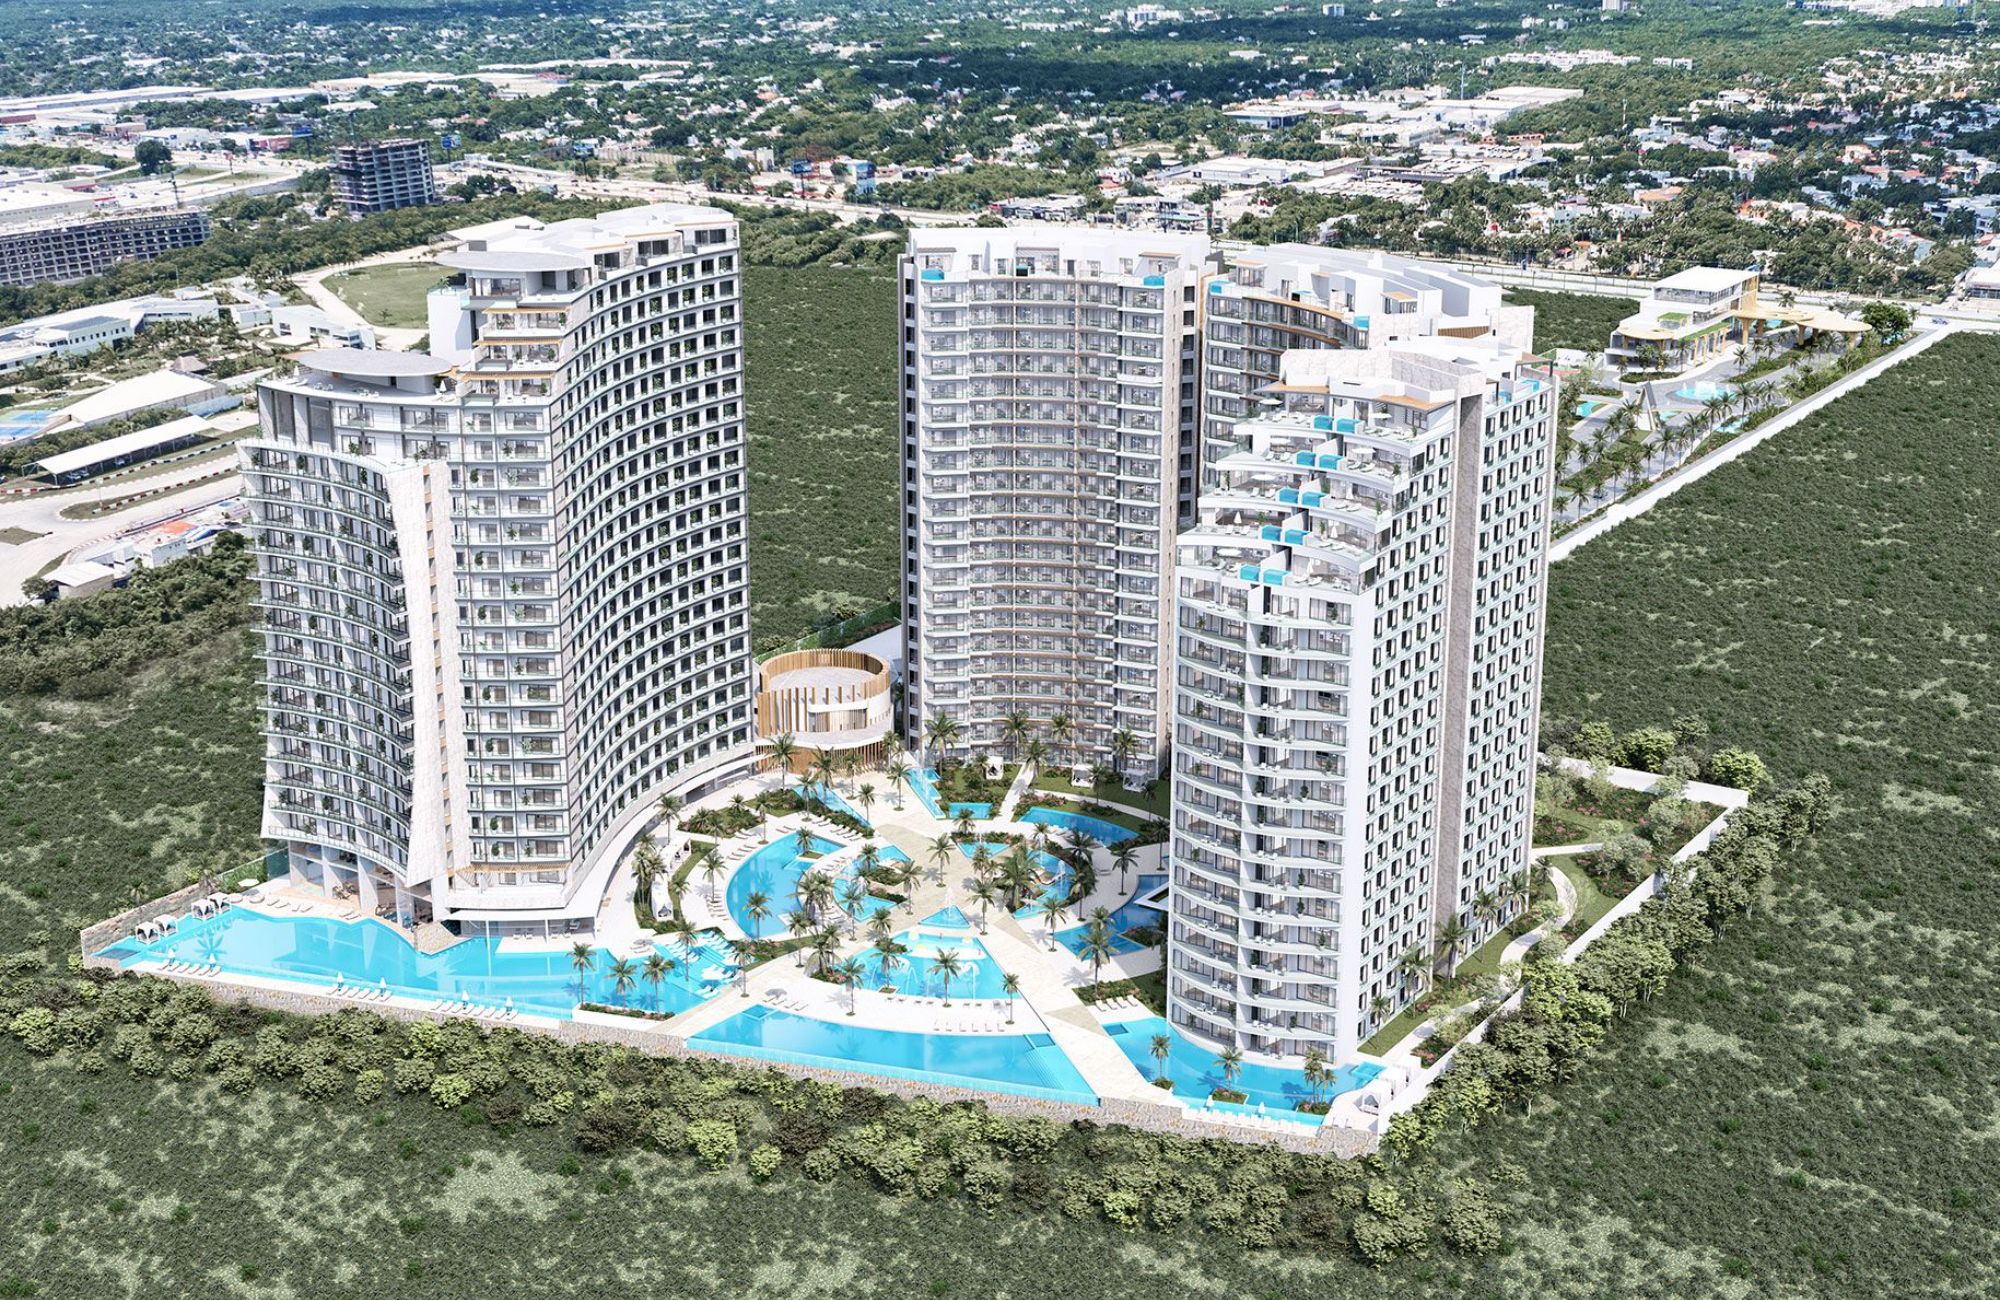 Luxury apartment with concierge, cinema, spa, gym, sky lounge, restaurant, dog area and more amenities in pre-construction, for sale Cancun.